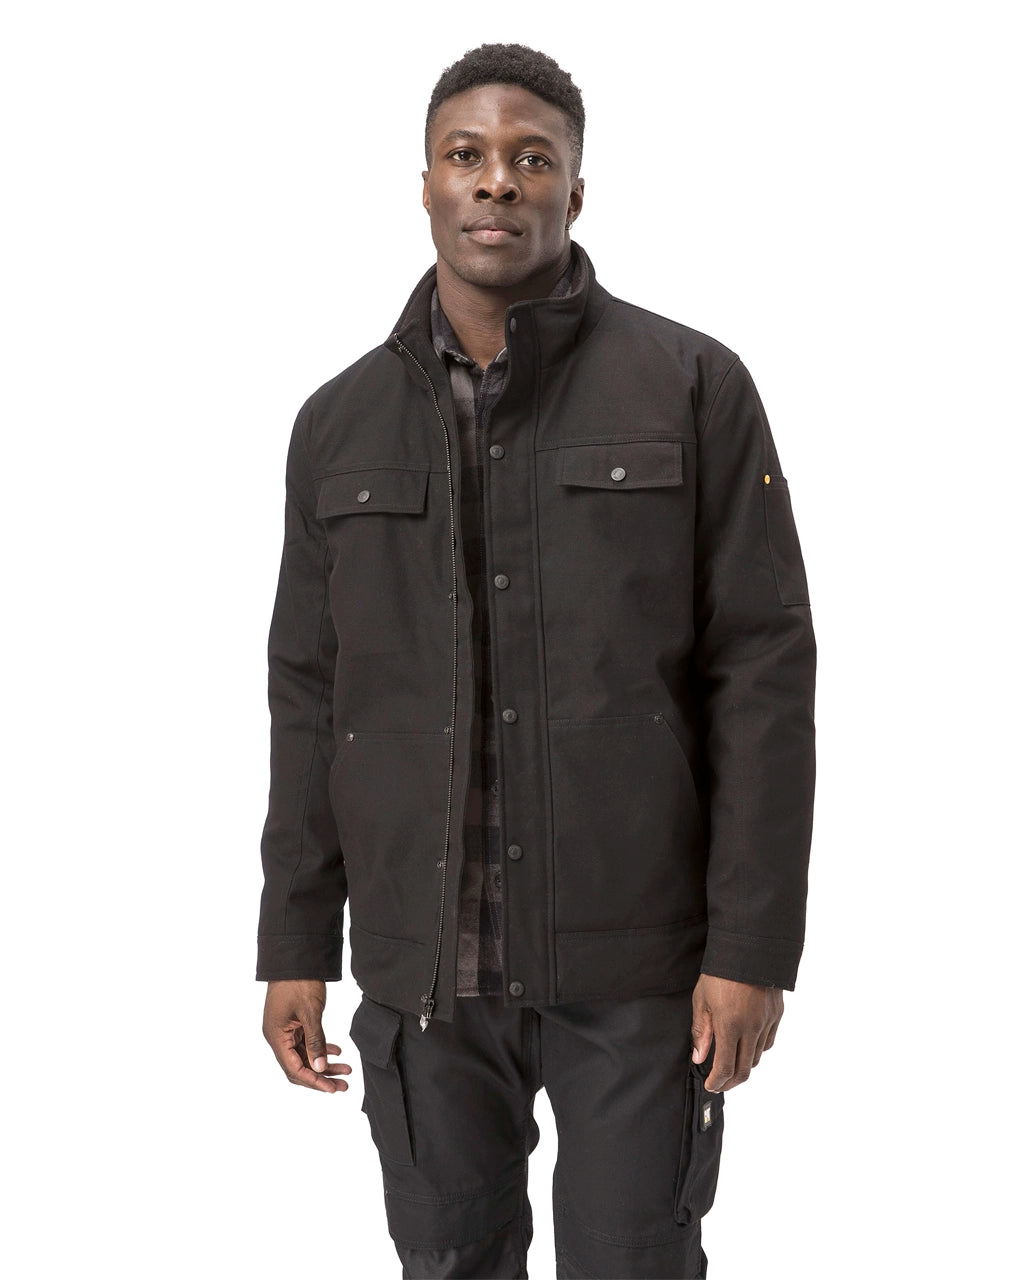 Men's Insulated Utility Jacket